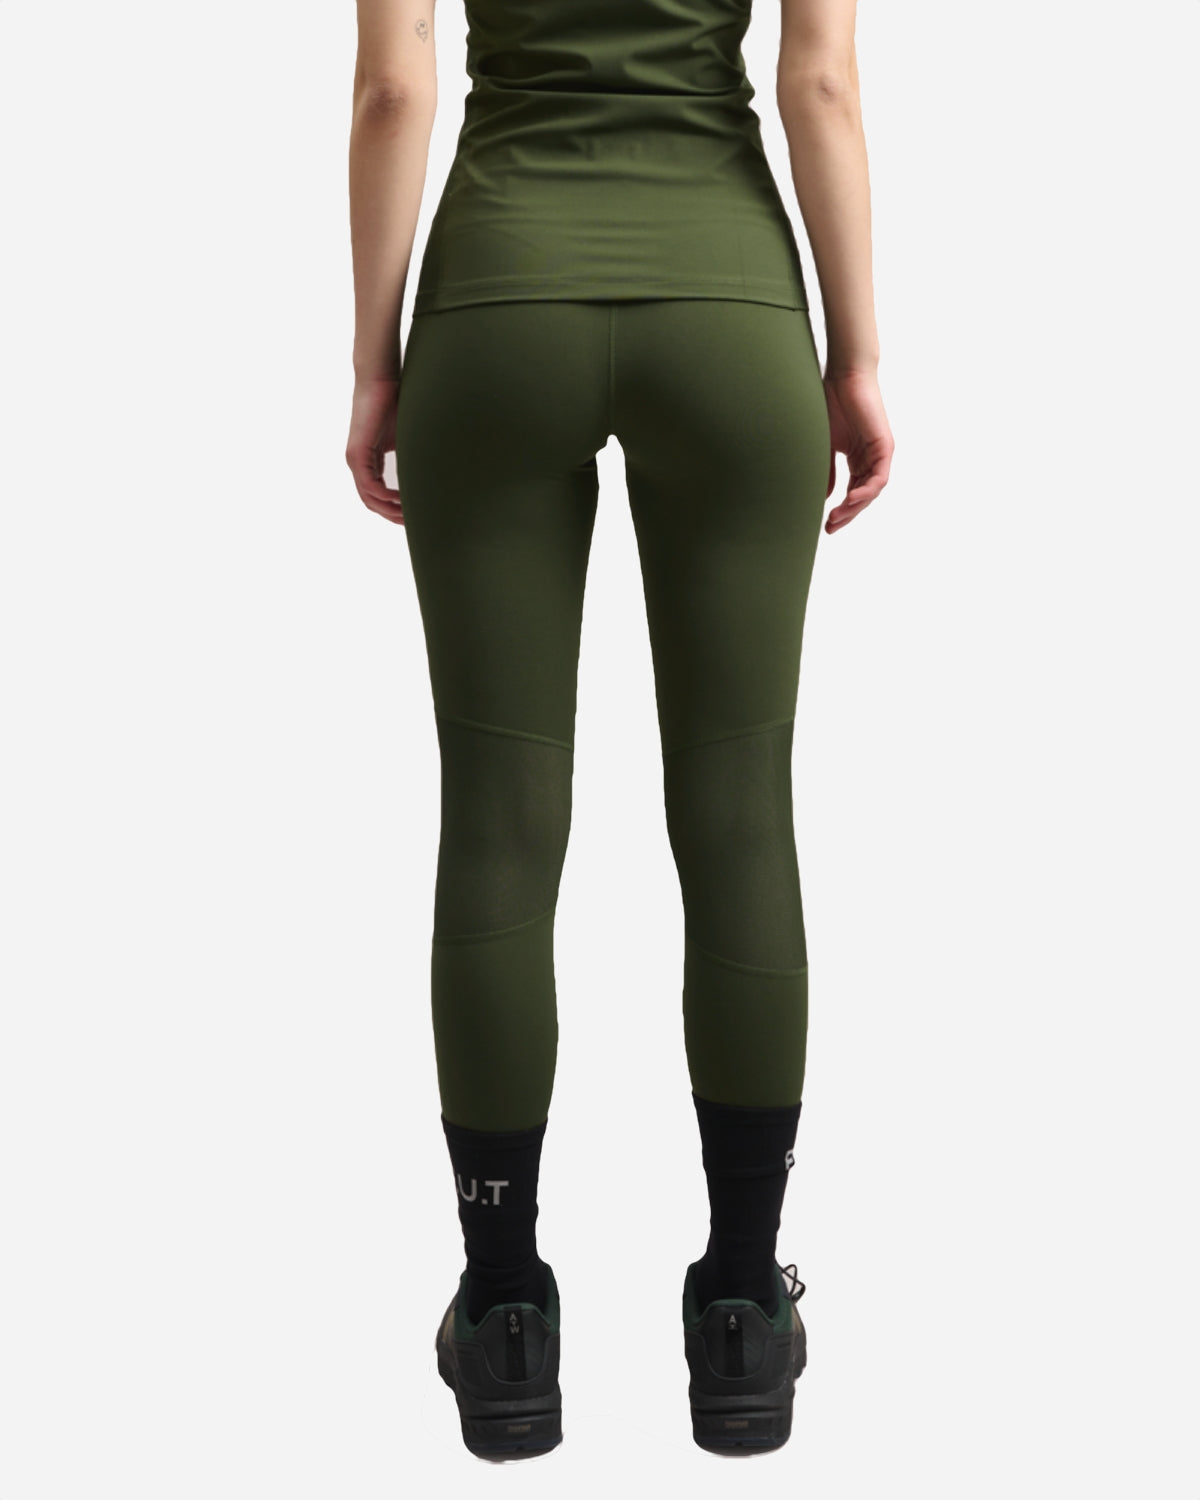 HALO Womens Highrise Tights - Forest Night